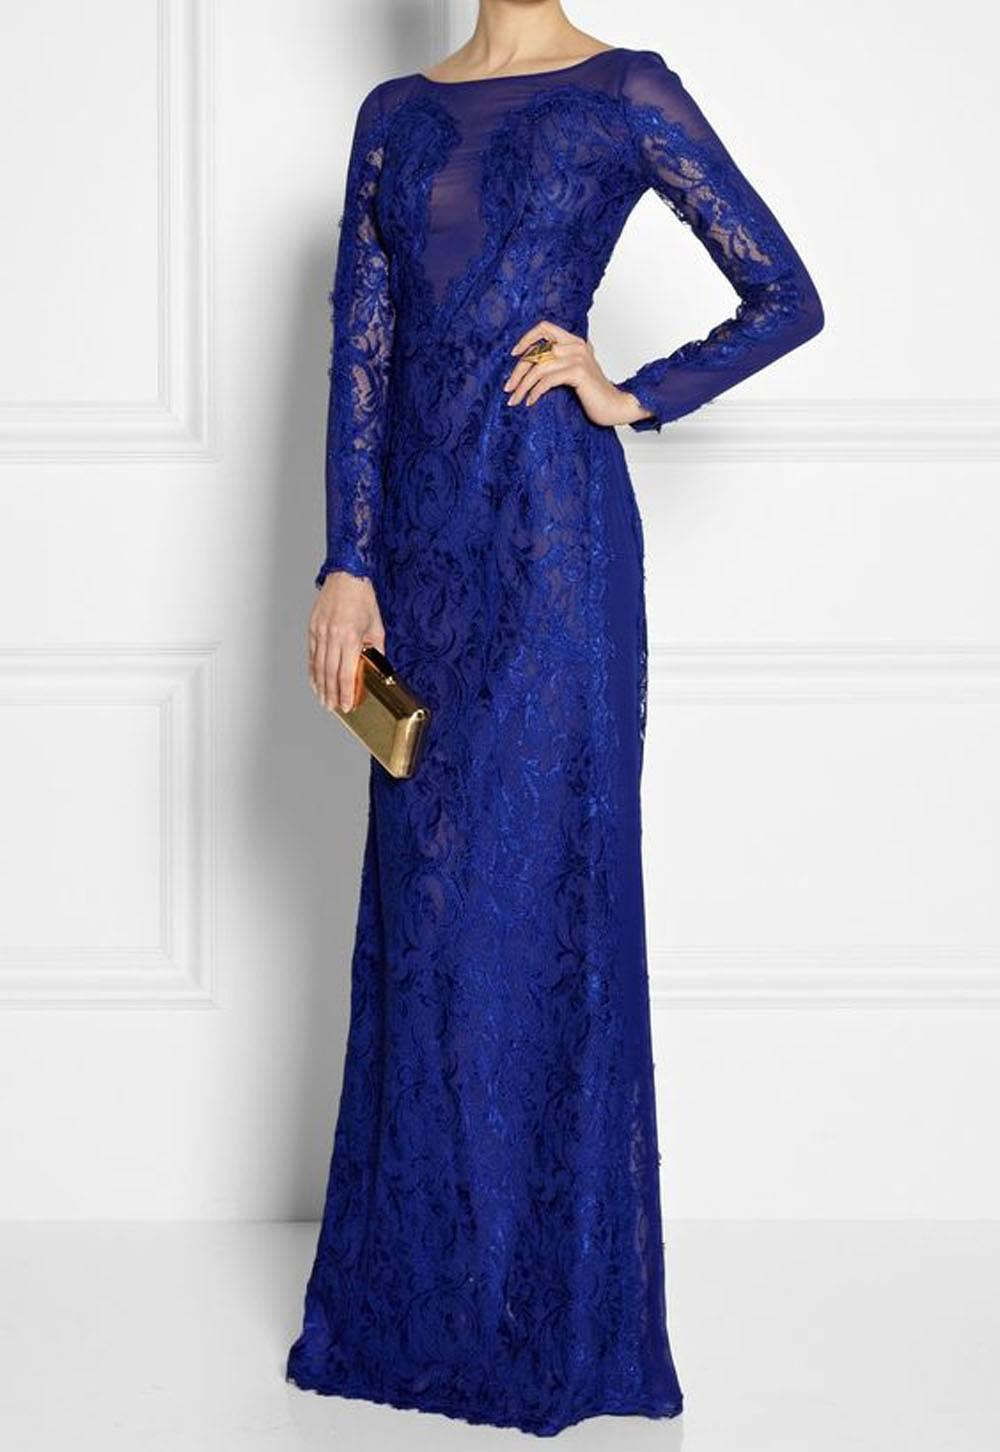 Women's New Emilio Pucci Lace Cheer Blue Dress Gown It.40